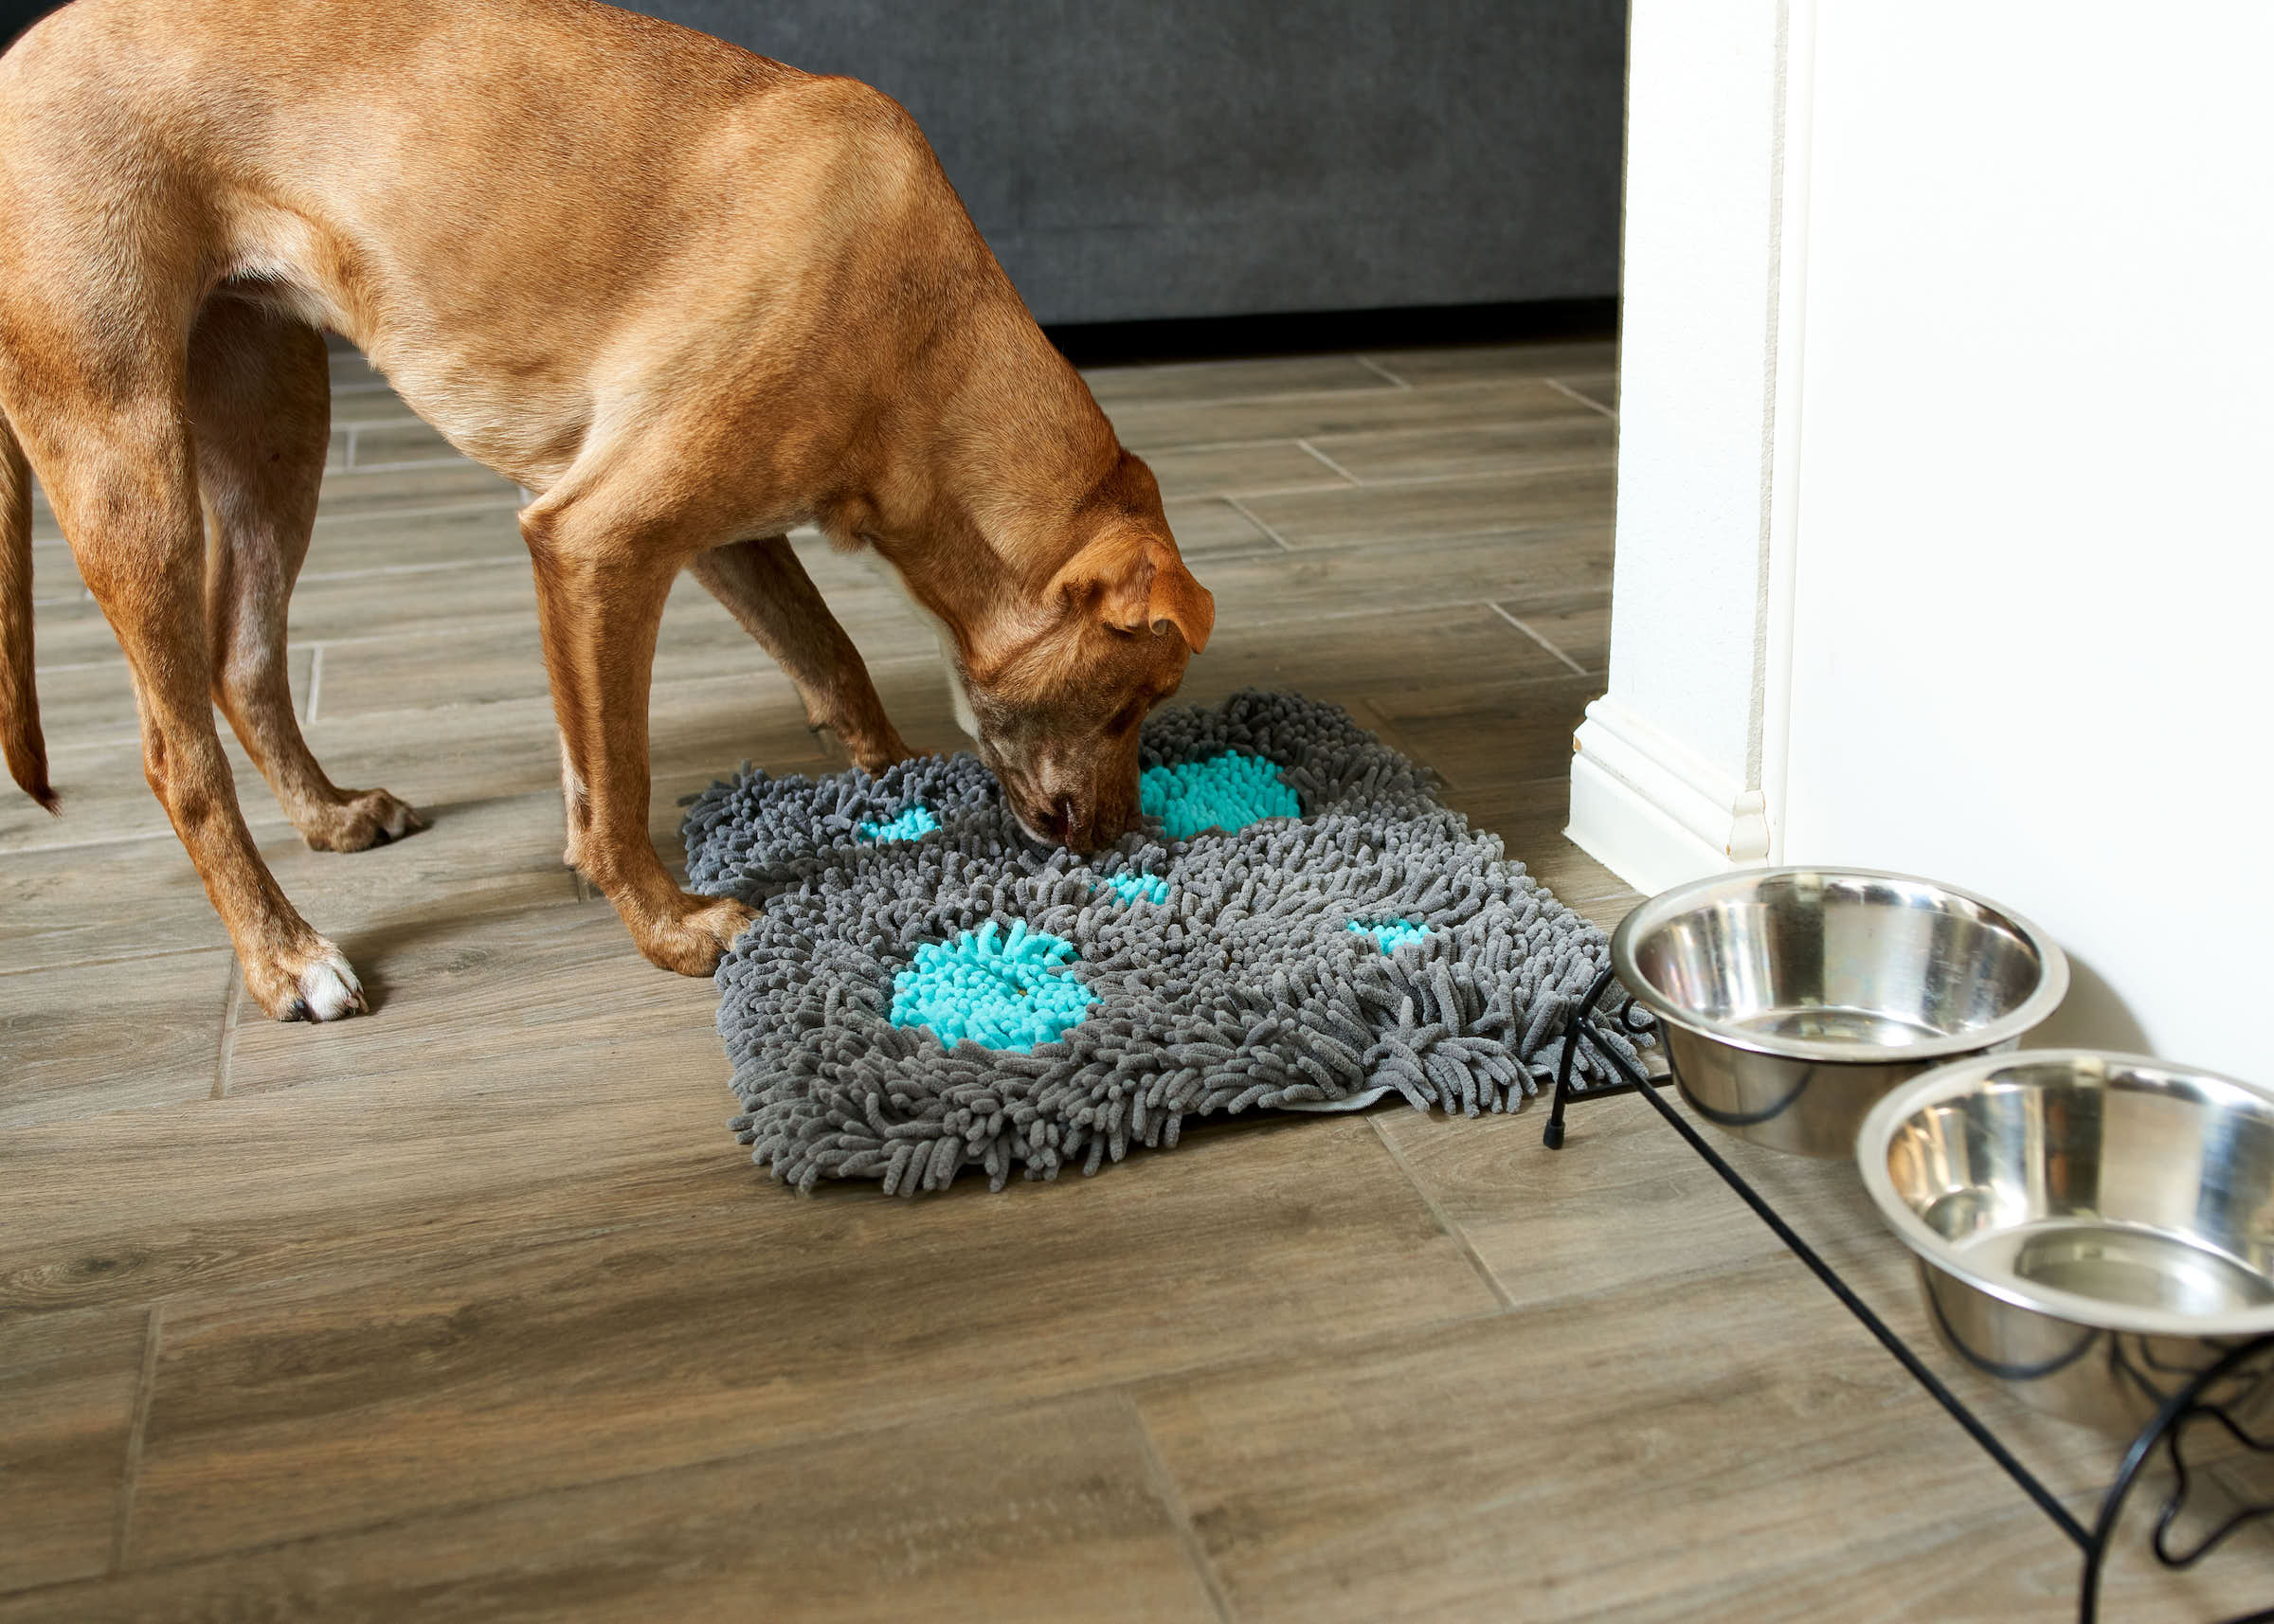 Puzzle Feeder Snuffle Mat for Dogs, Lick Mat for Dogs to Slow Down Eating, Dog  Puzzle